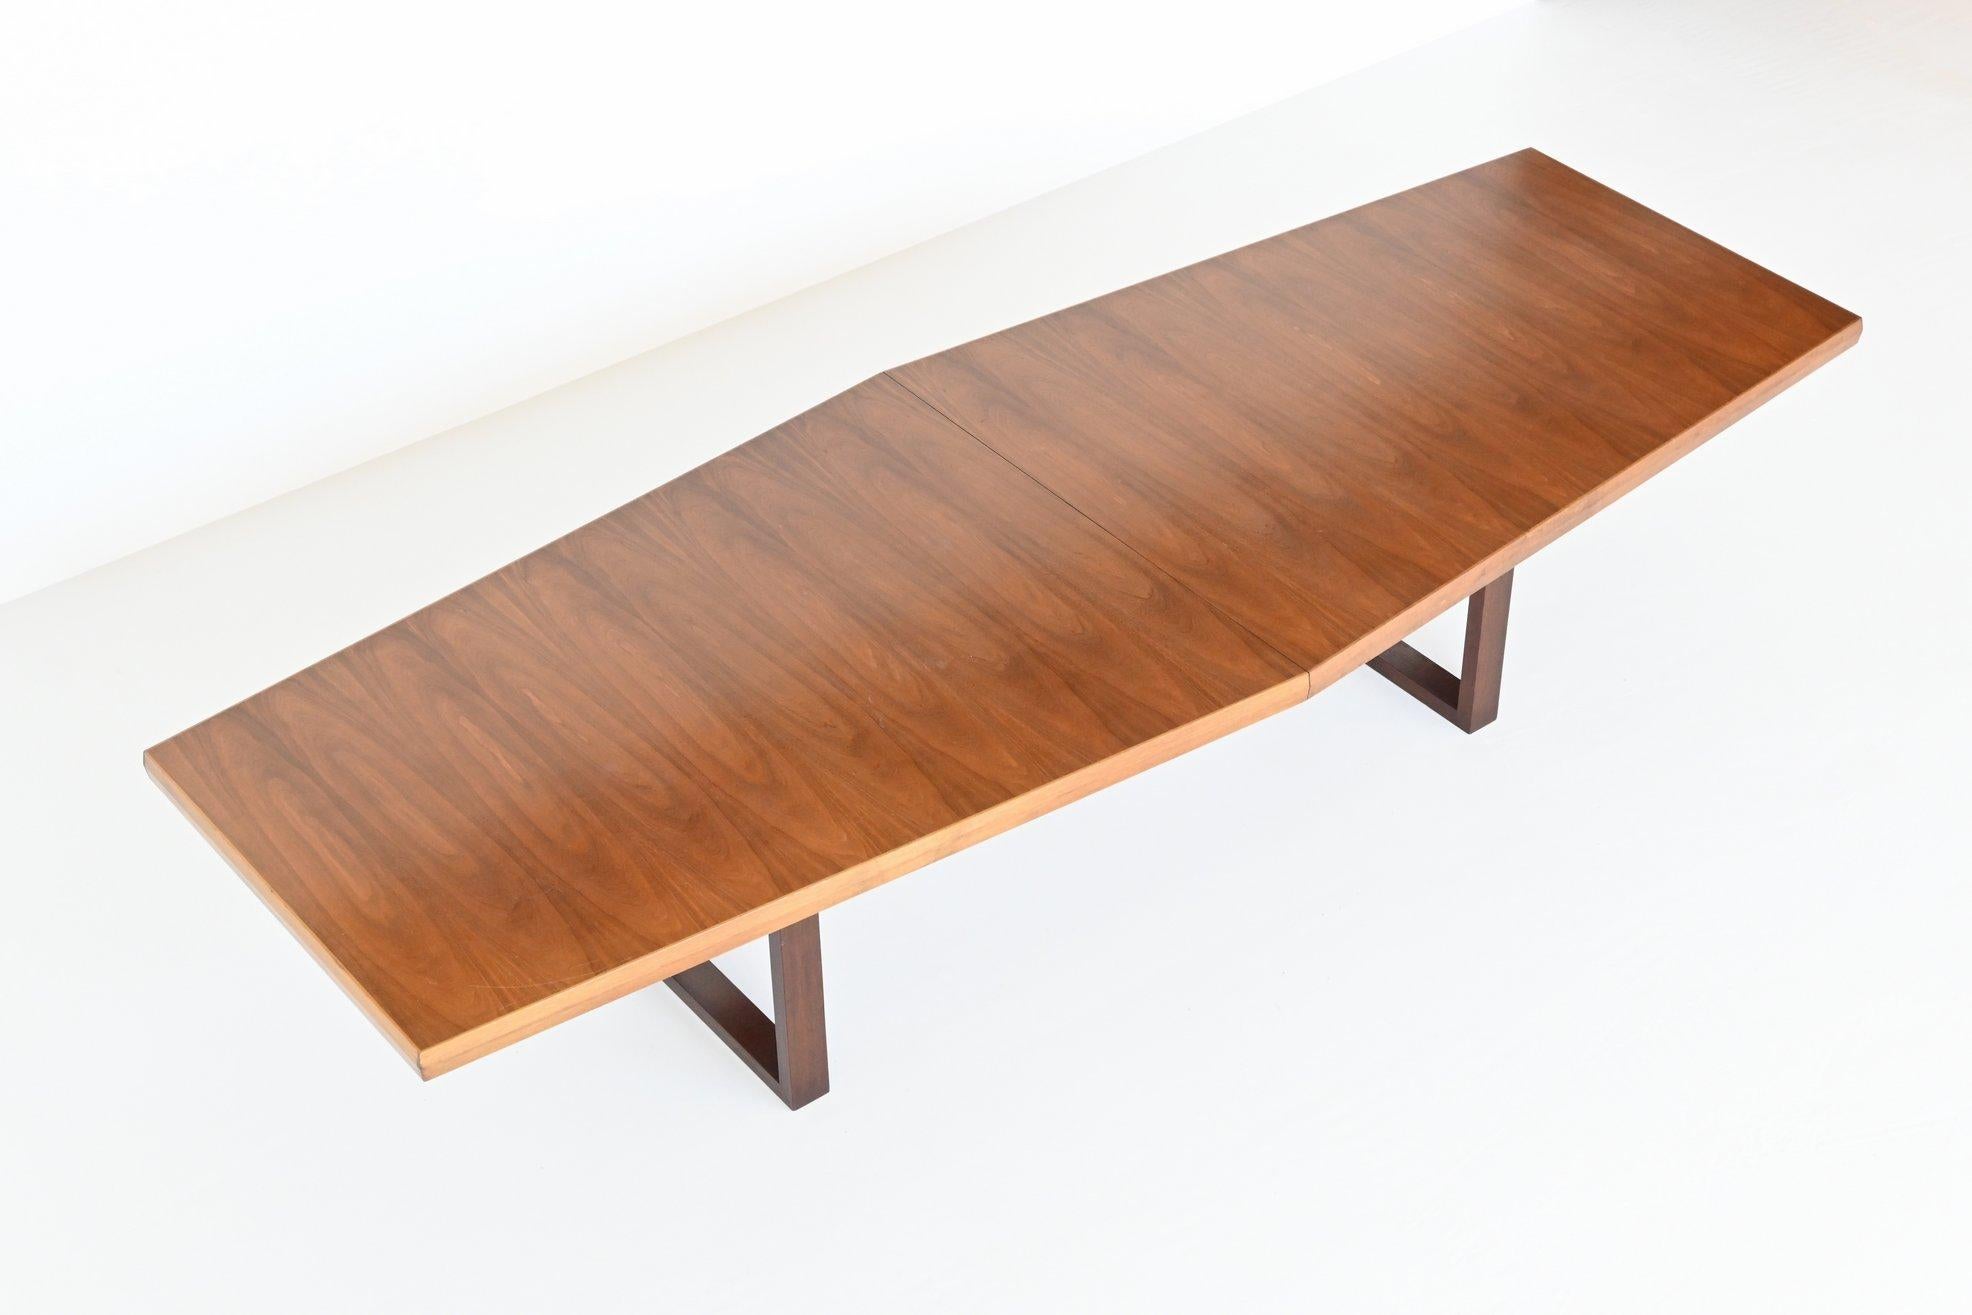 Beautiful trapezium shaped large conference or dining table, The Netherlands 1970. This very nice and unique table has a large tapered top made of veneered walnut wood. The top consists of two parts with a length of 320 cm and a width of 90 to 120